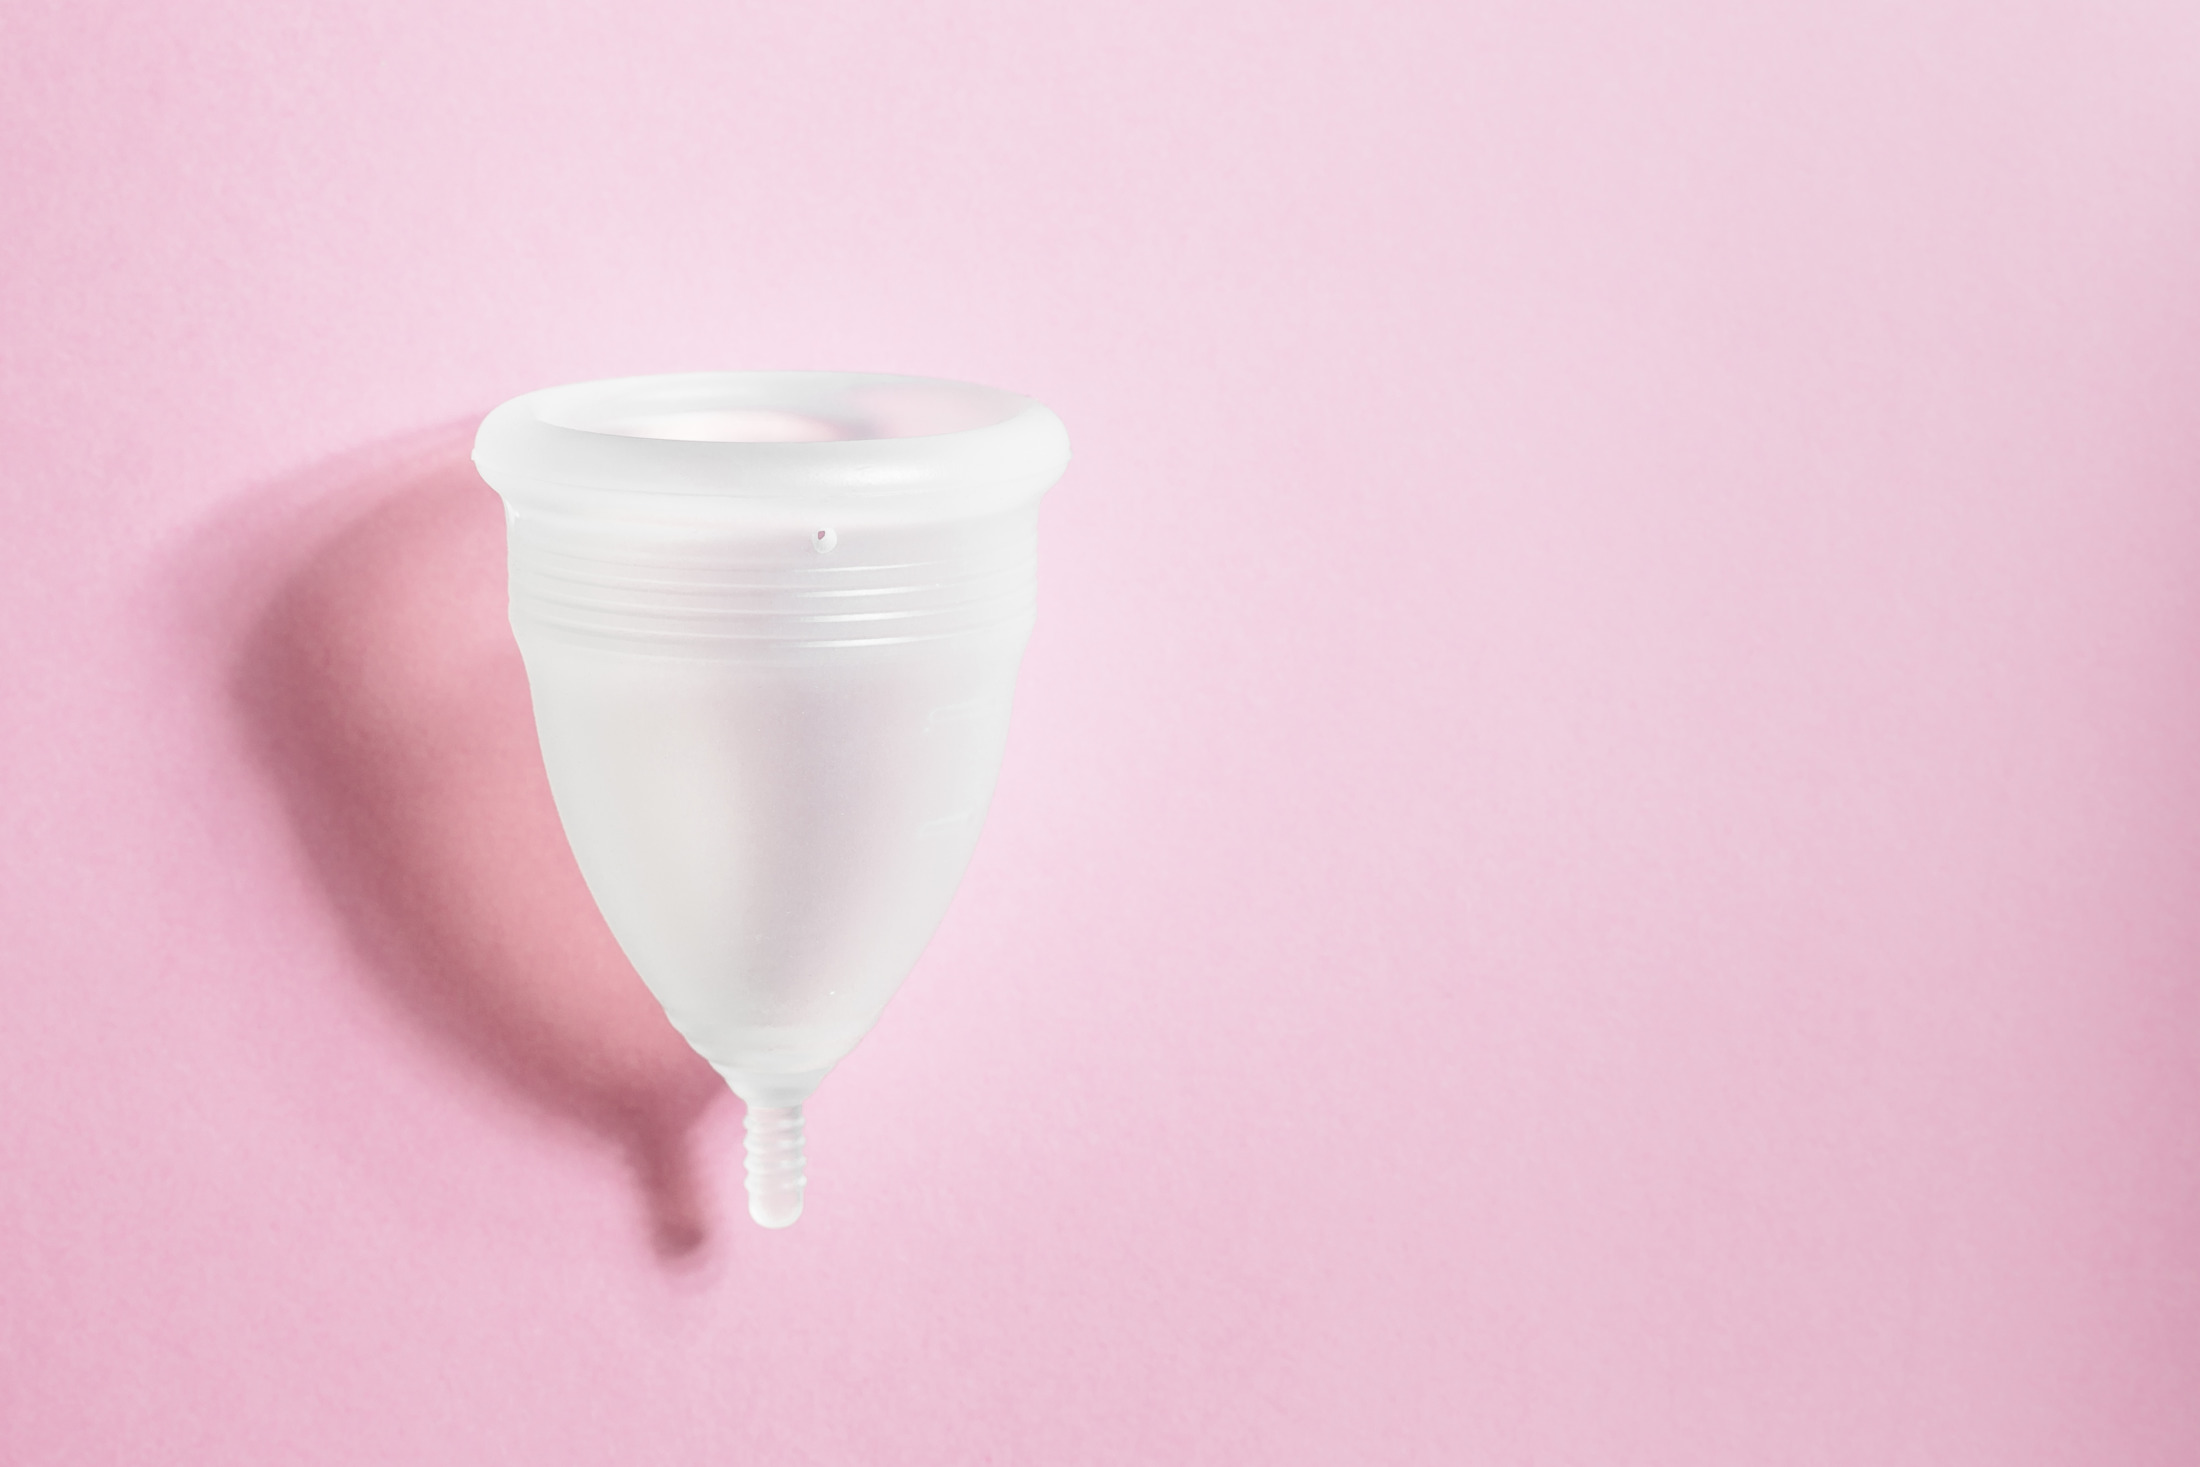 Excellent tips for buying a menstrual cup